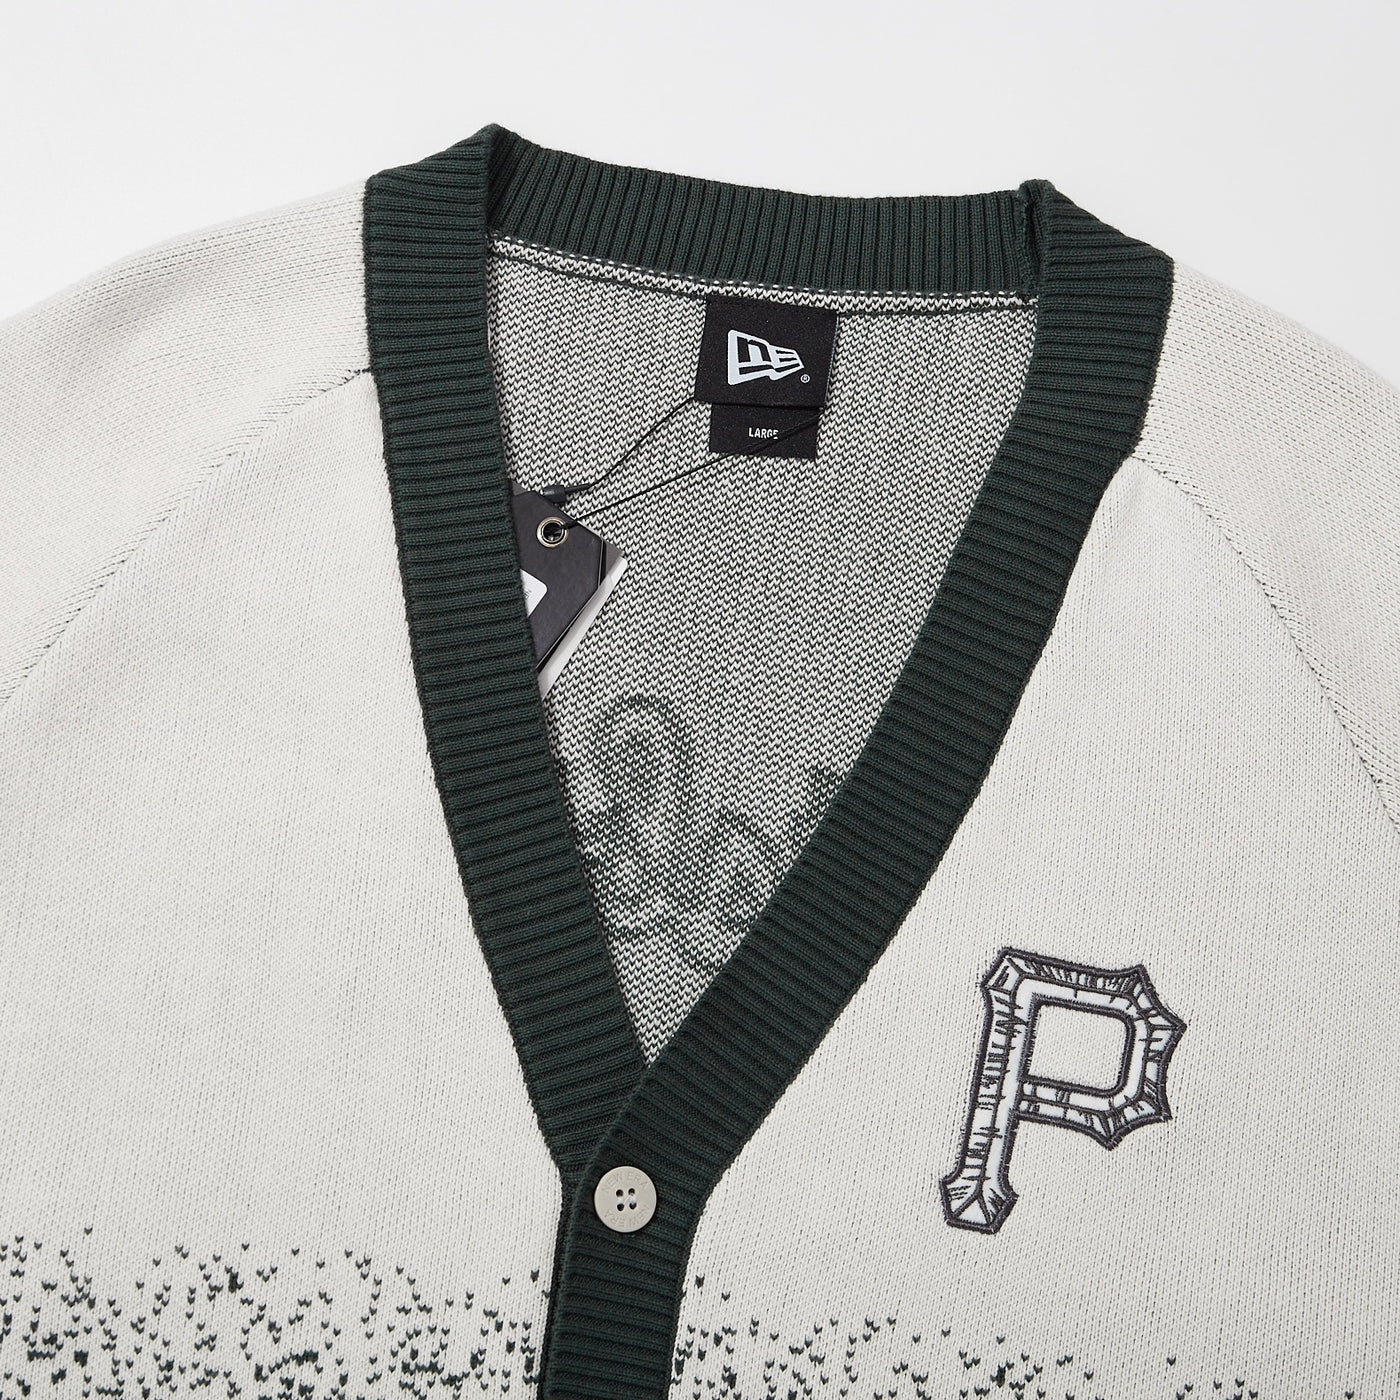 PITTSBURGH PIRATES ANCIENT CULTURE WHITE AND GREEN GRADIENT CARDIGAN